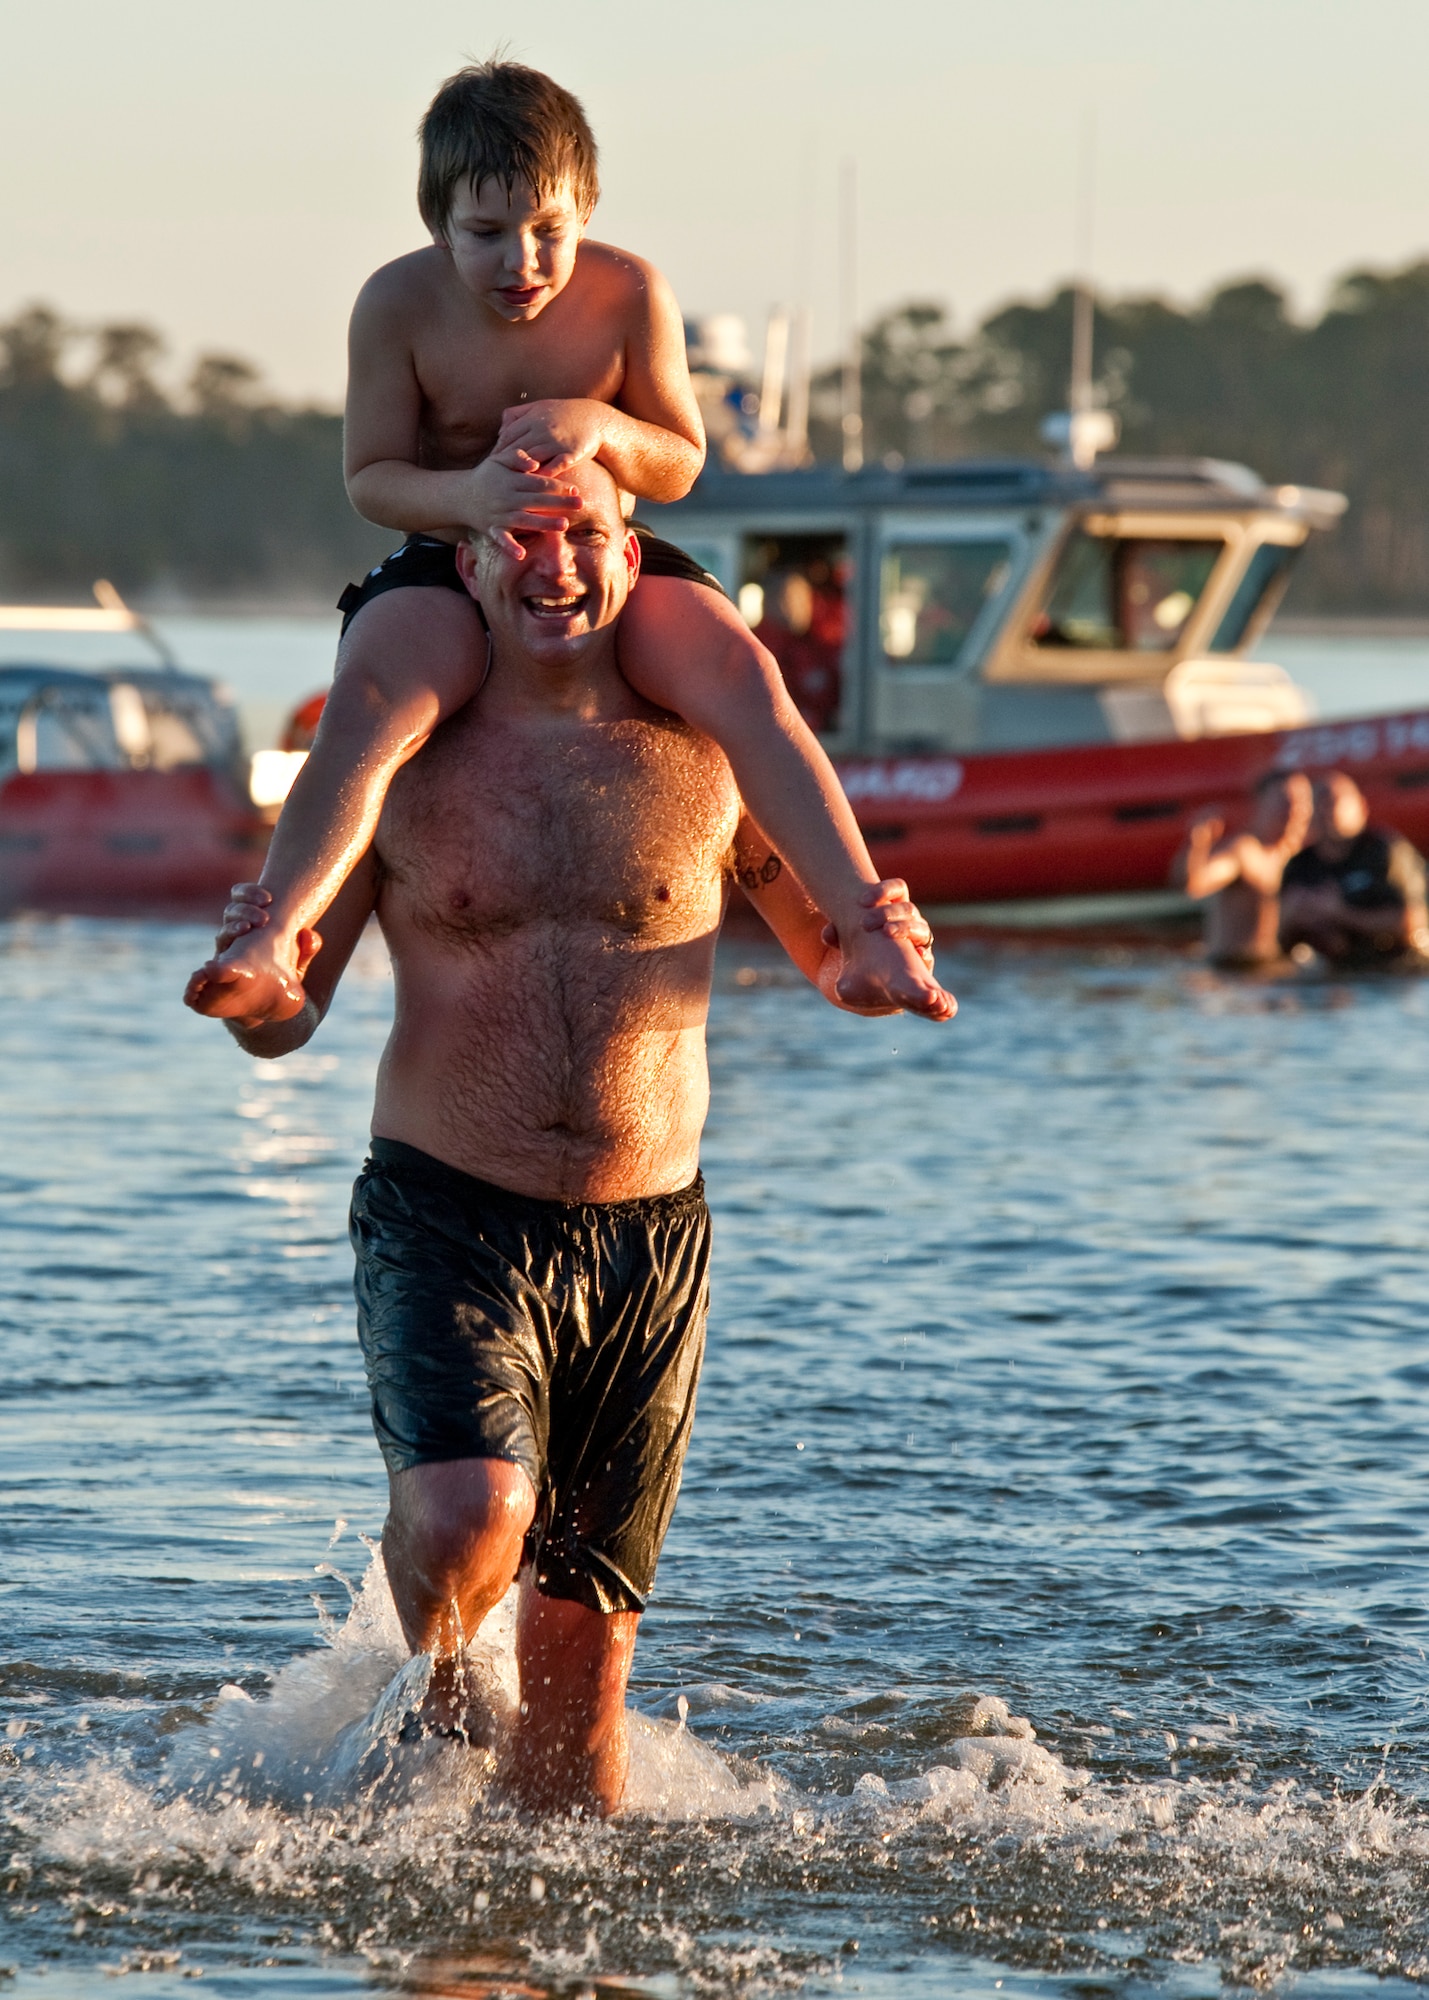 Master Sgt. Christopher Calhoun, 33rd Maintenance Operation Squadron, carries out son William after they shared a ‘very’ quick dunk under the water at Eglin’s first-ever Polar Bear swim, held at Post’l Point, Jan. 7.  More than 100 Team Eglin members braved the 34 degree temperatures and waded into Choctawhatchee Bay, including the 96th Air Base Wing commander and command chief.  (U.S. Air Force photo/Samuel King Jr.)